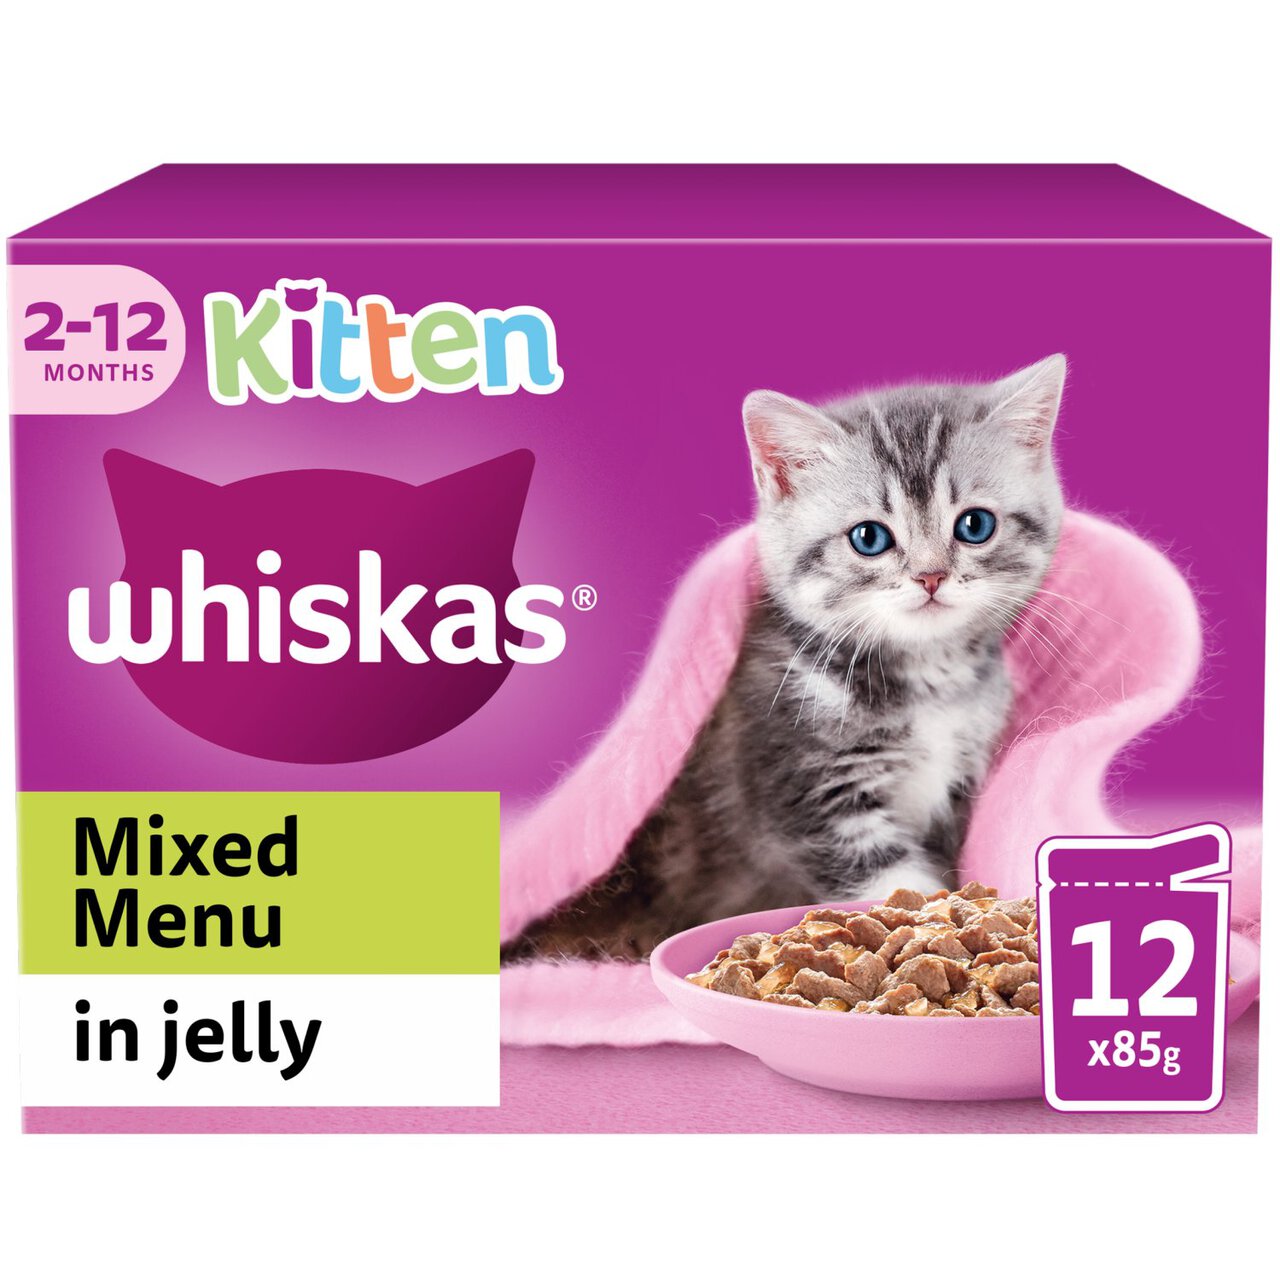 Whiskas Kitten 2-12months Mixed Fish & Meat in Jelly 12 x 85g